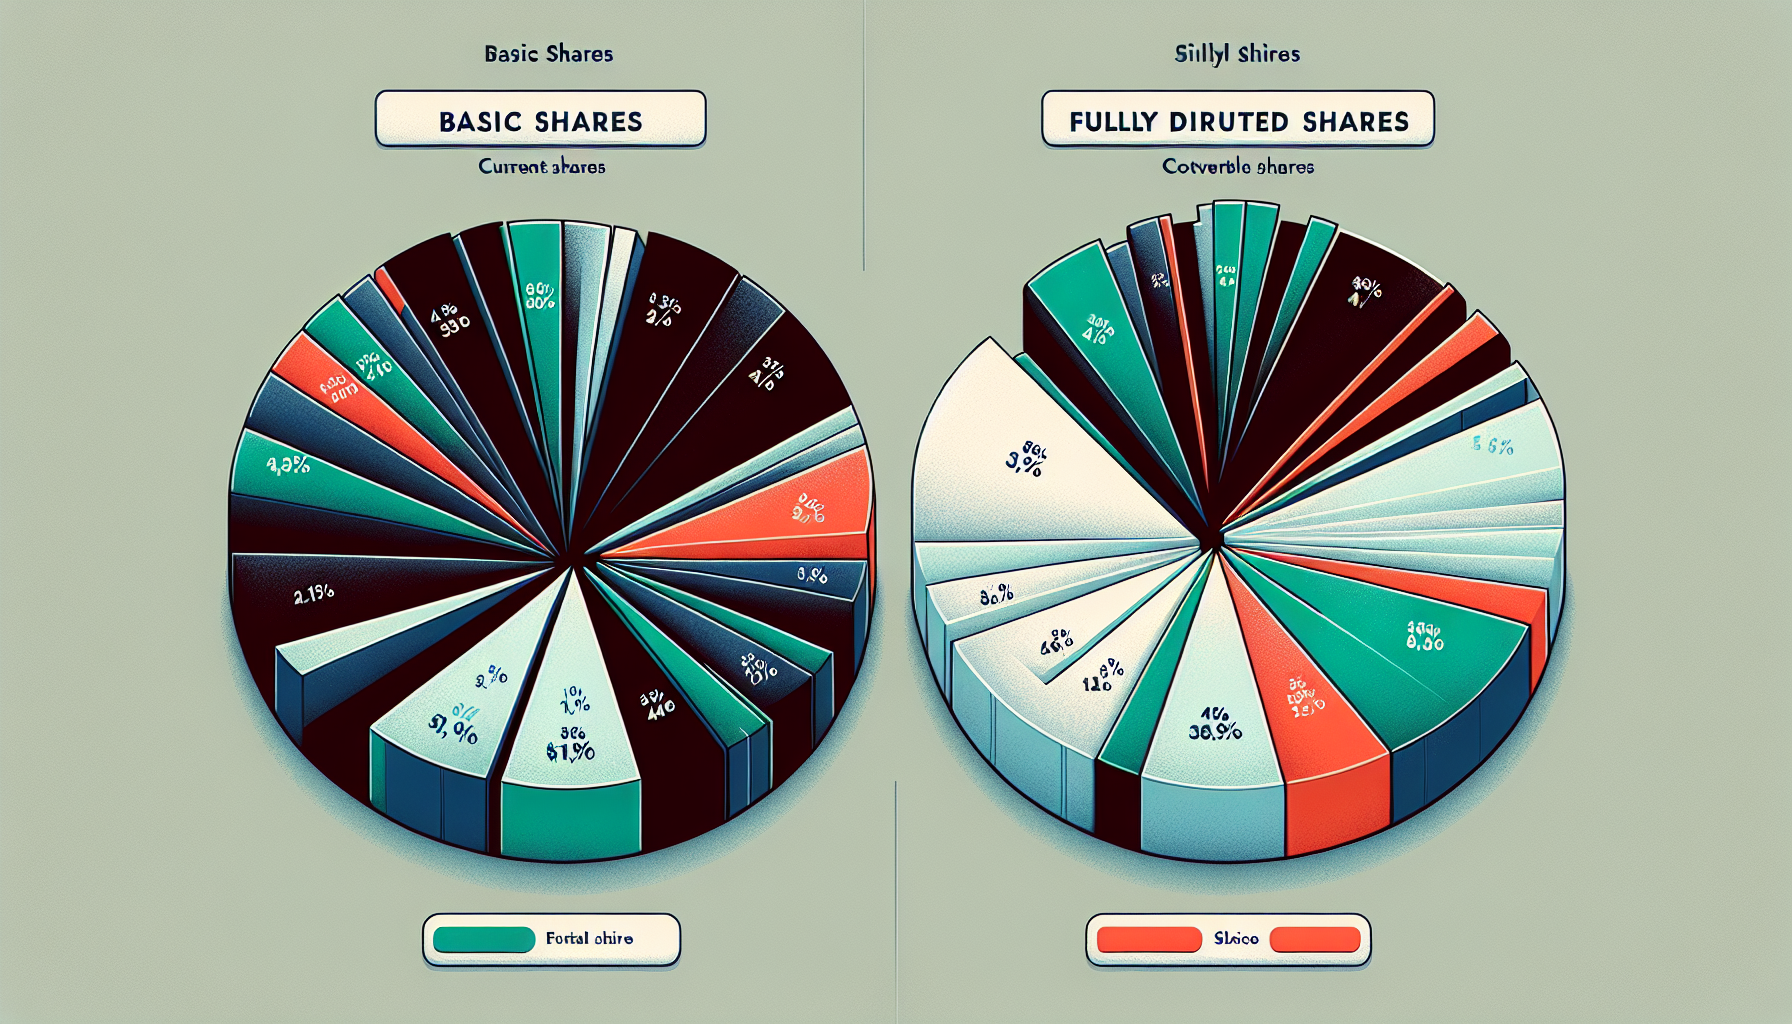 Illustration of basic shares vs fully diluted shares